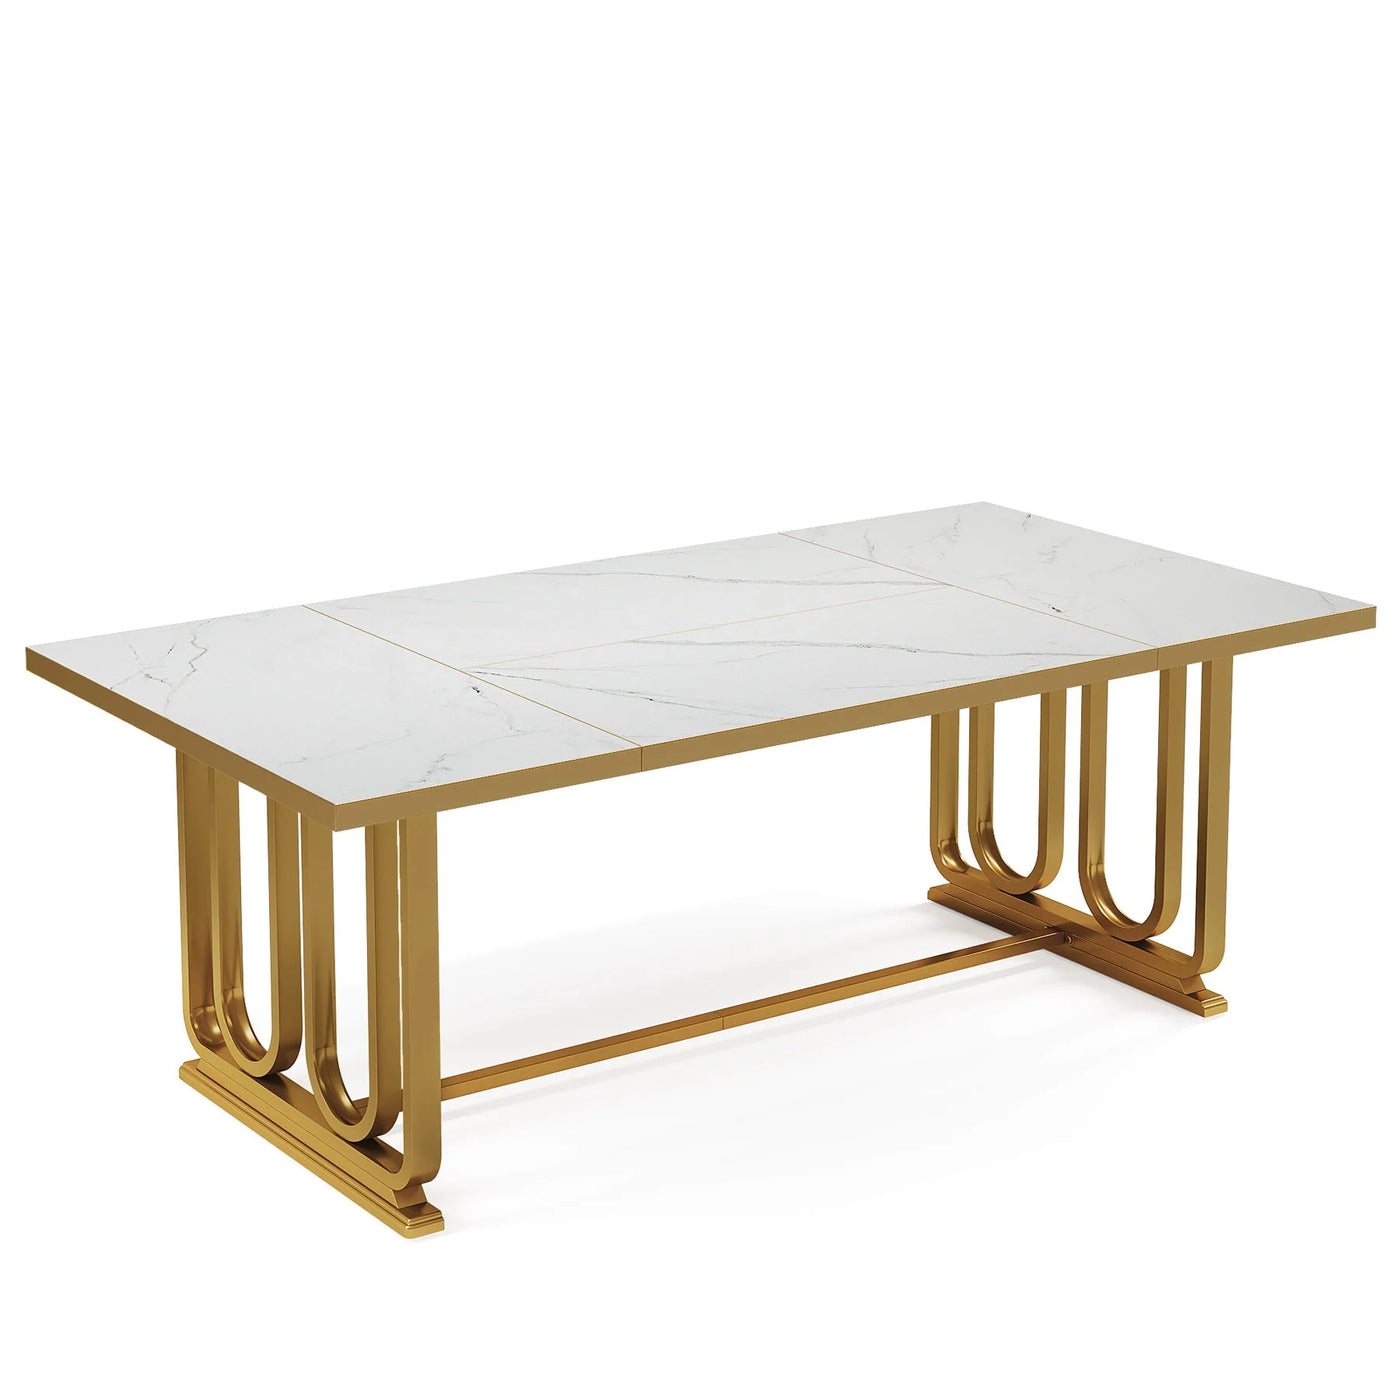 Loui 70.8" Dining Table | Faux Marble Modern Gold Metal Base Rectangle Kitchen Table for 6-8